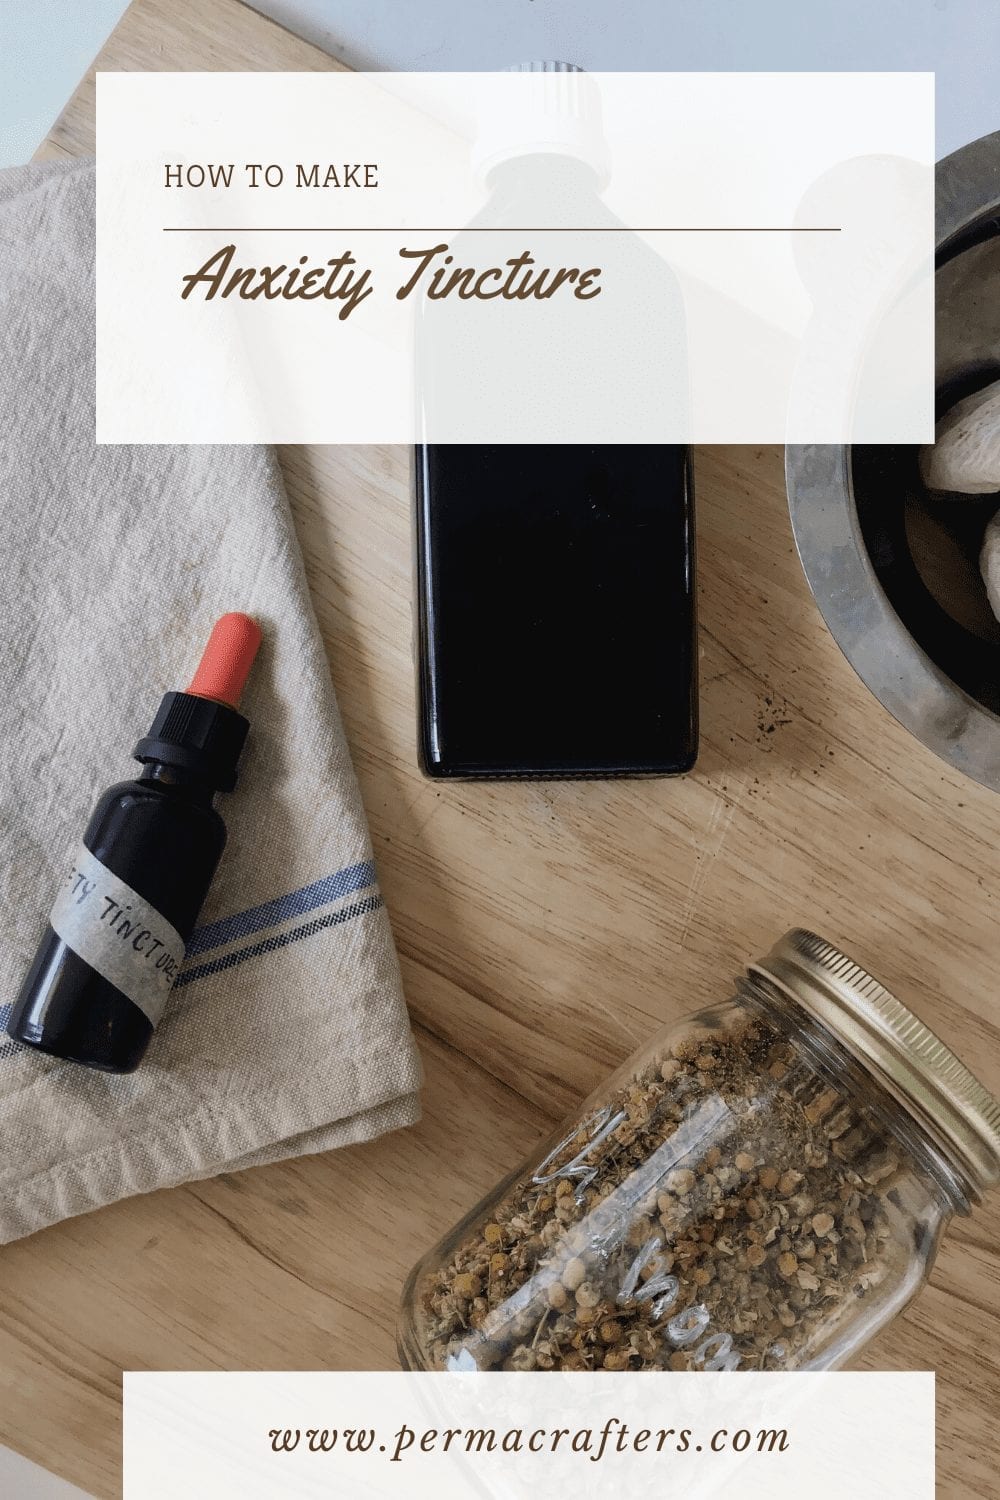 How to Make a Tincture for Anxiety